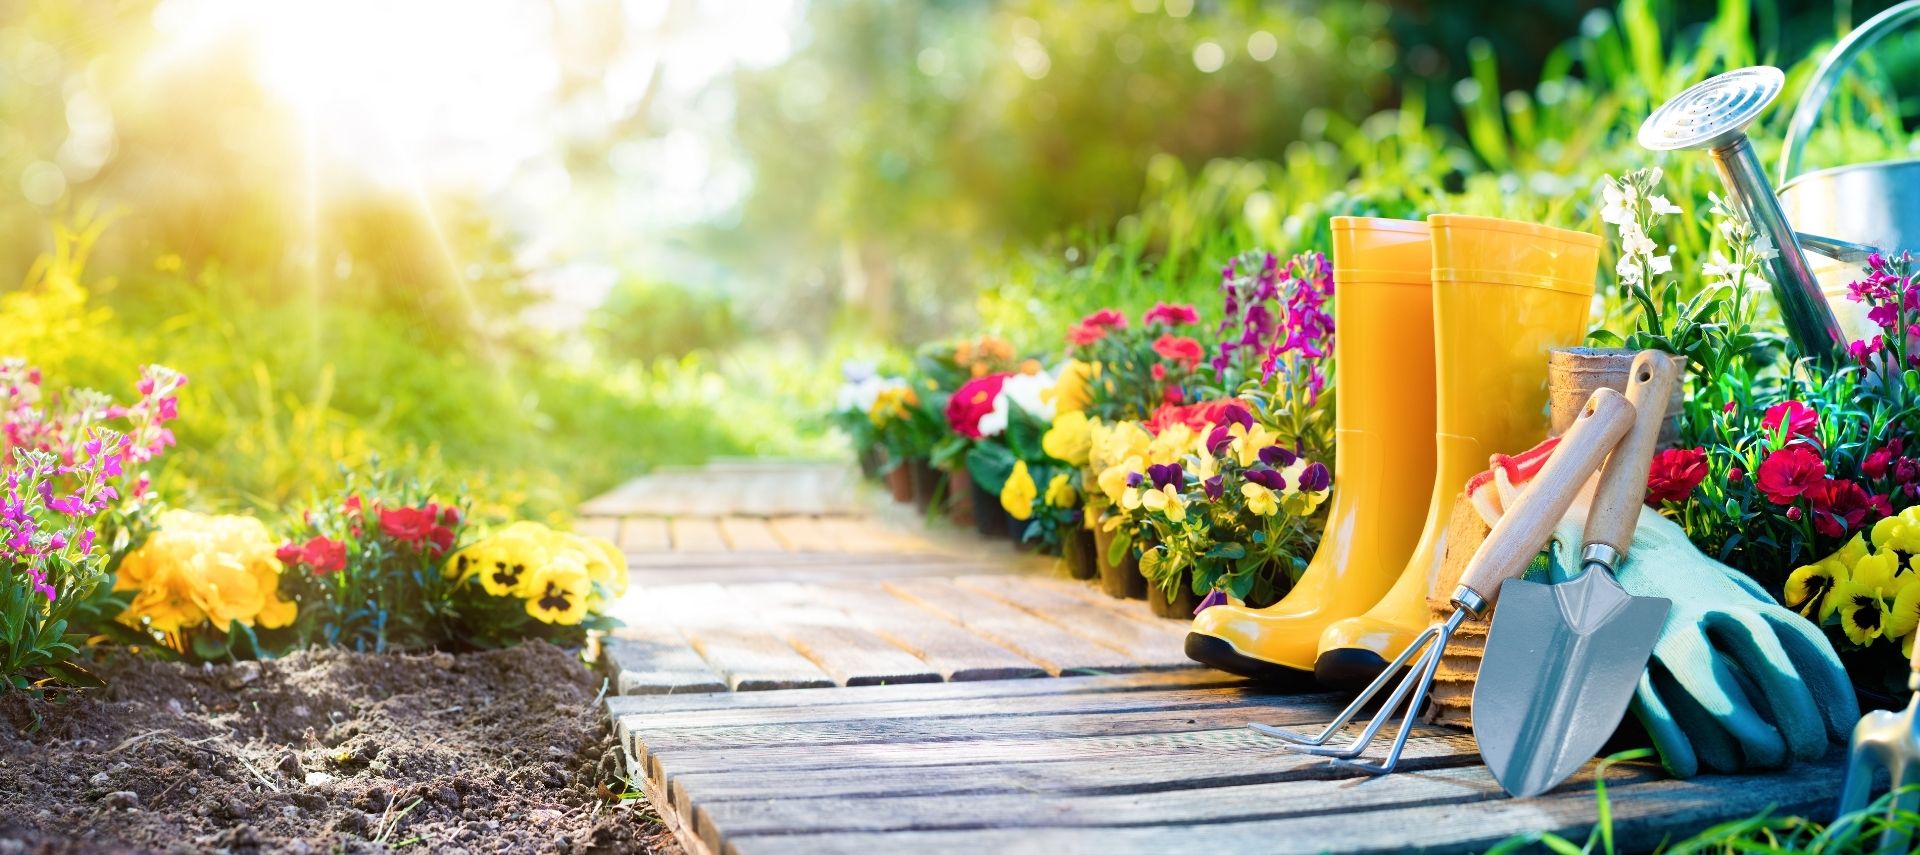 Wooden garden path through a floral garden with boots and garden tools in the forefront